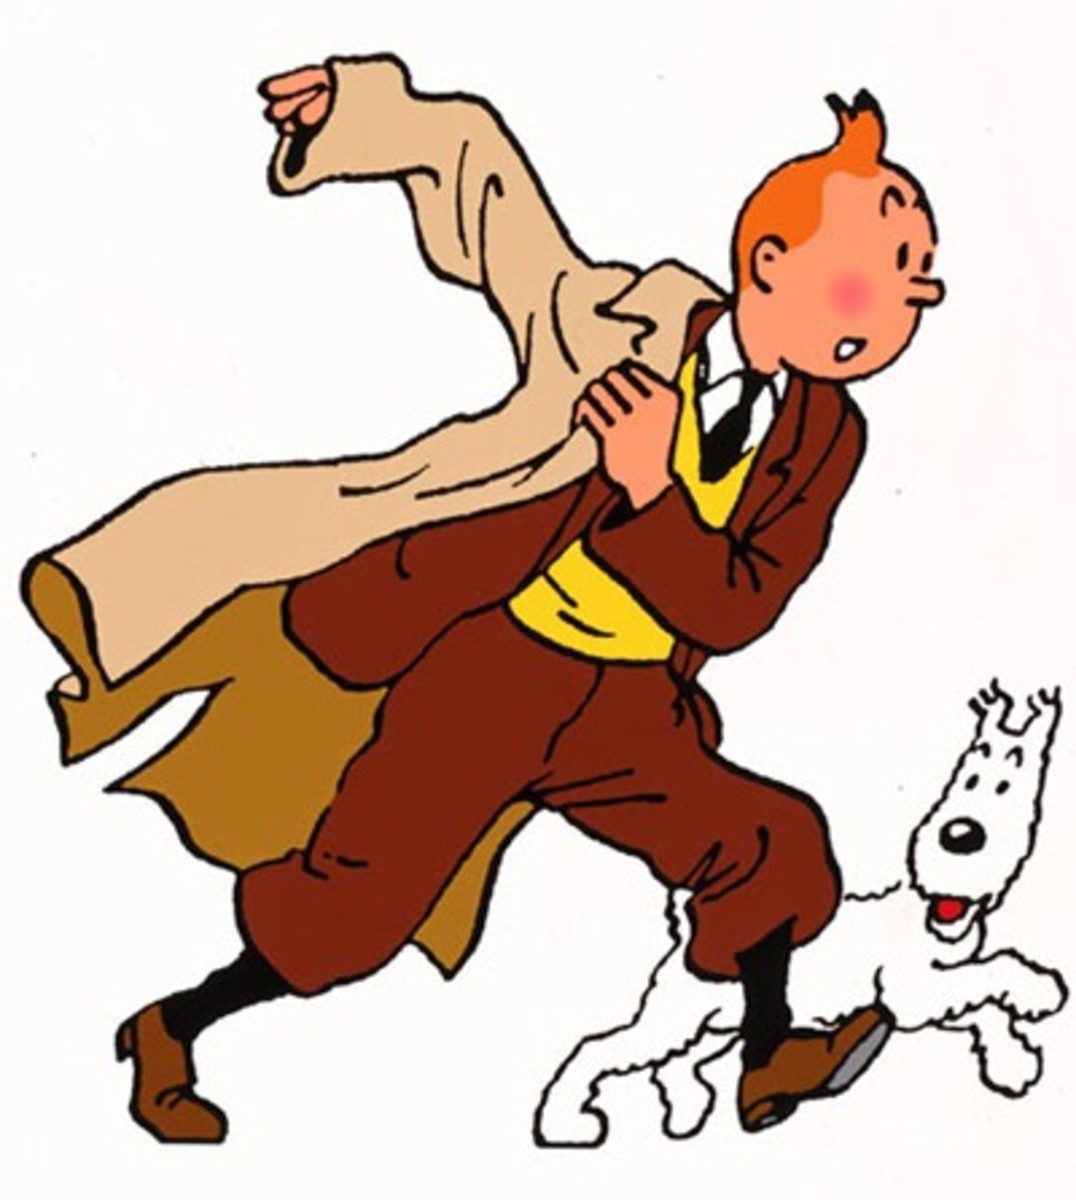 Tintin - Herge - Europe - Character profile and overview 